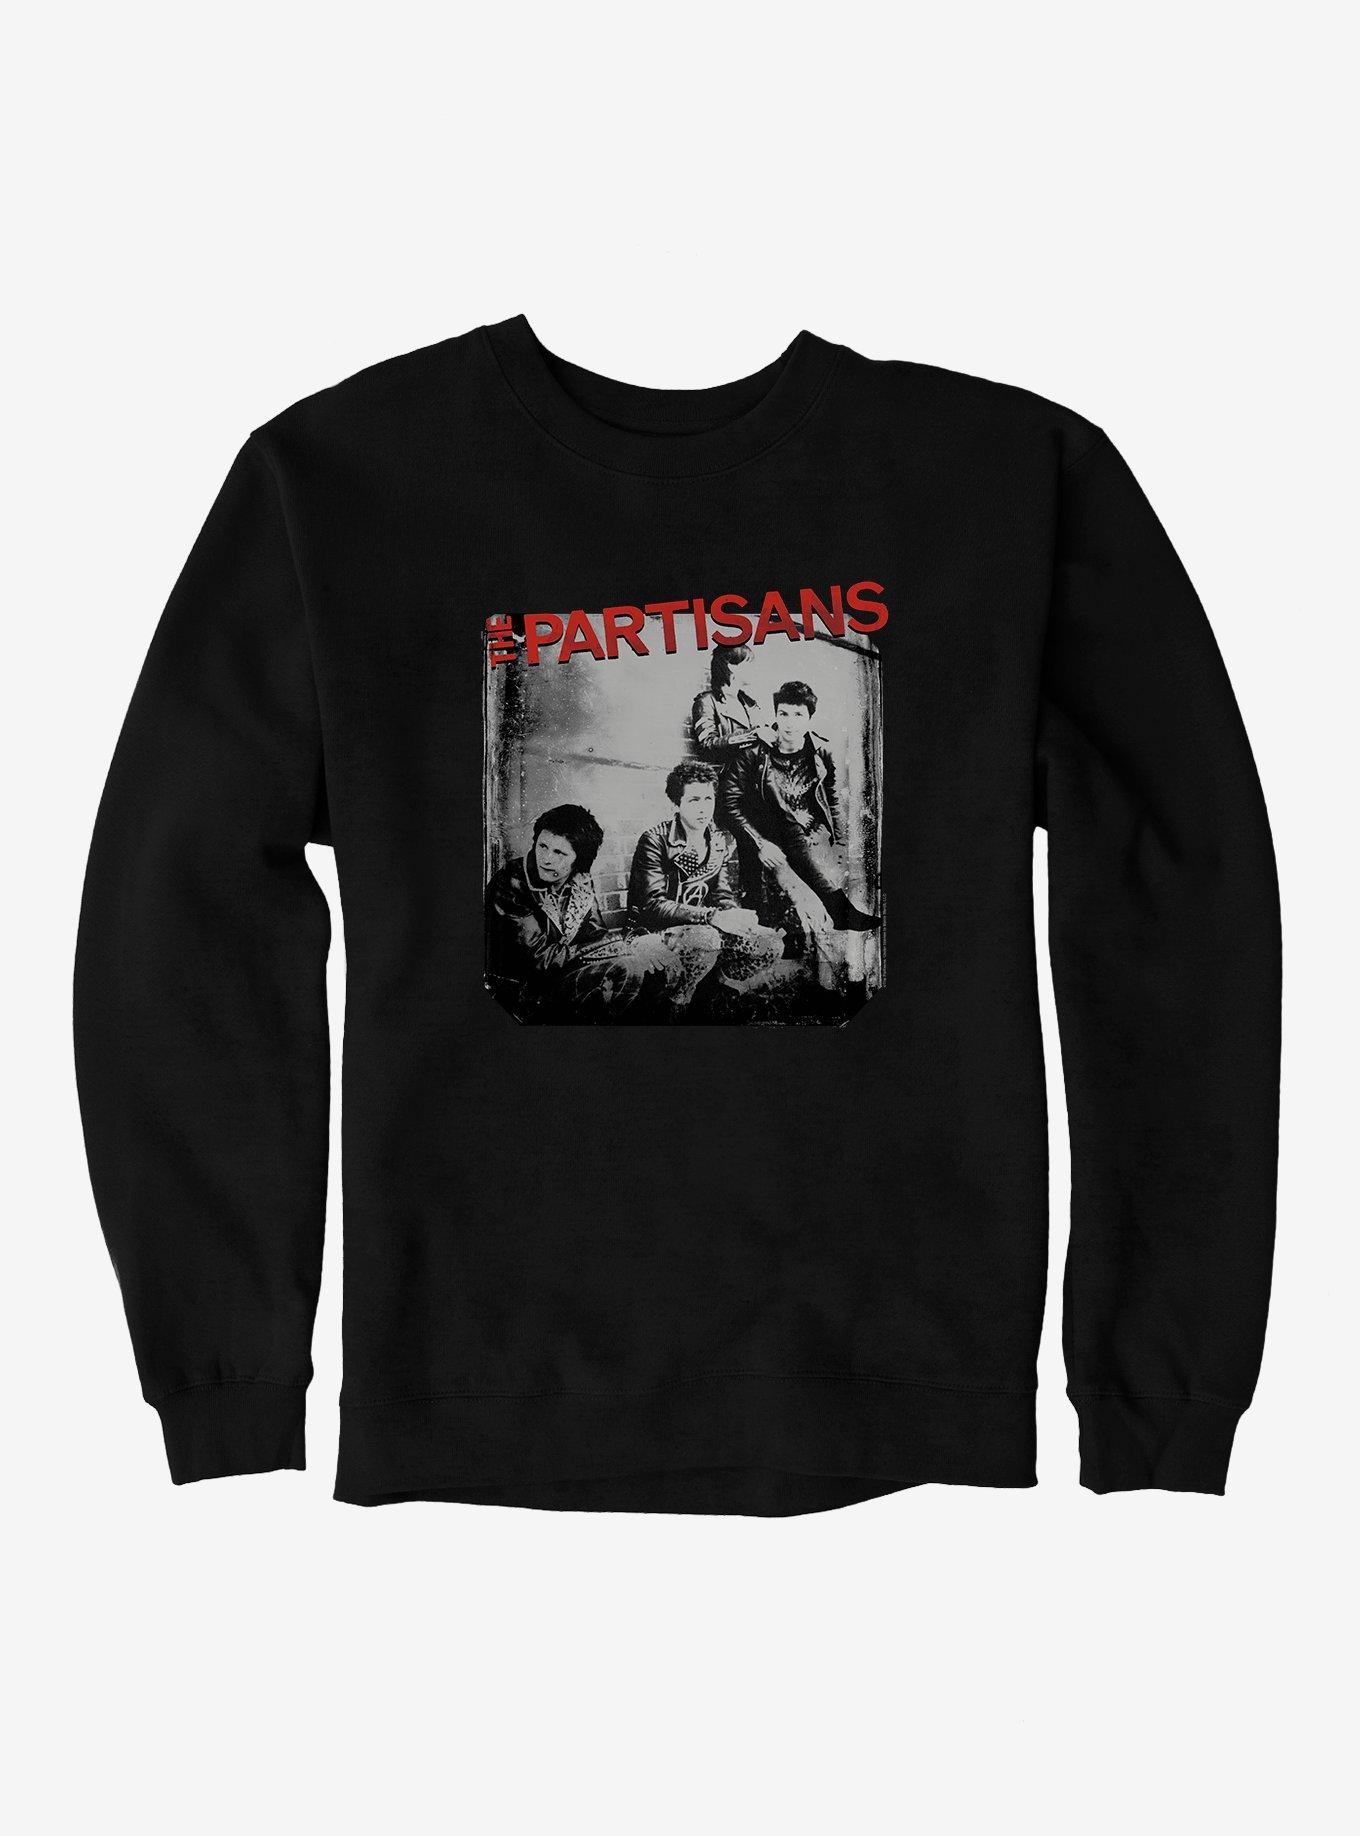 The Partisans Police Story Sweatshirt